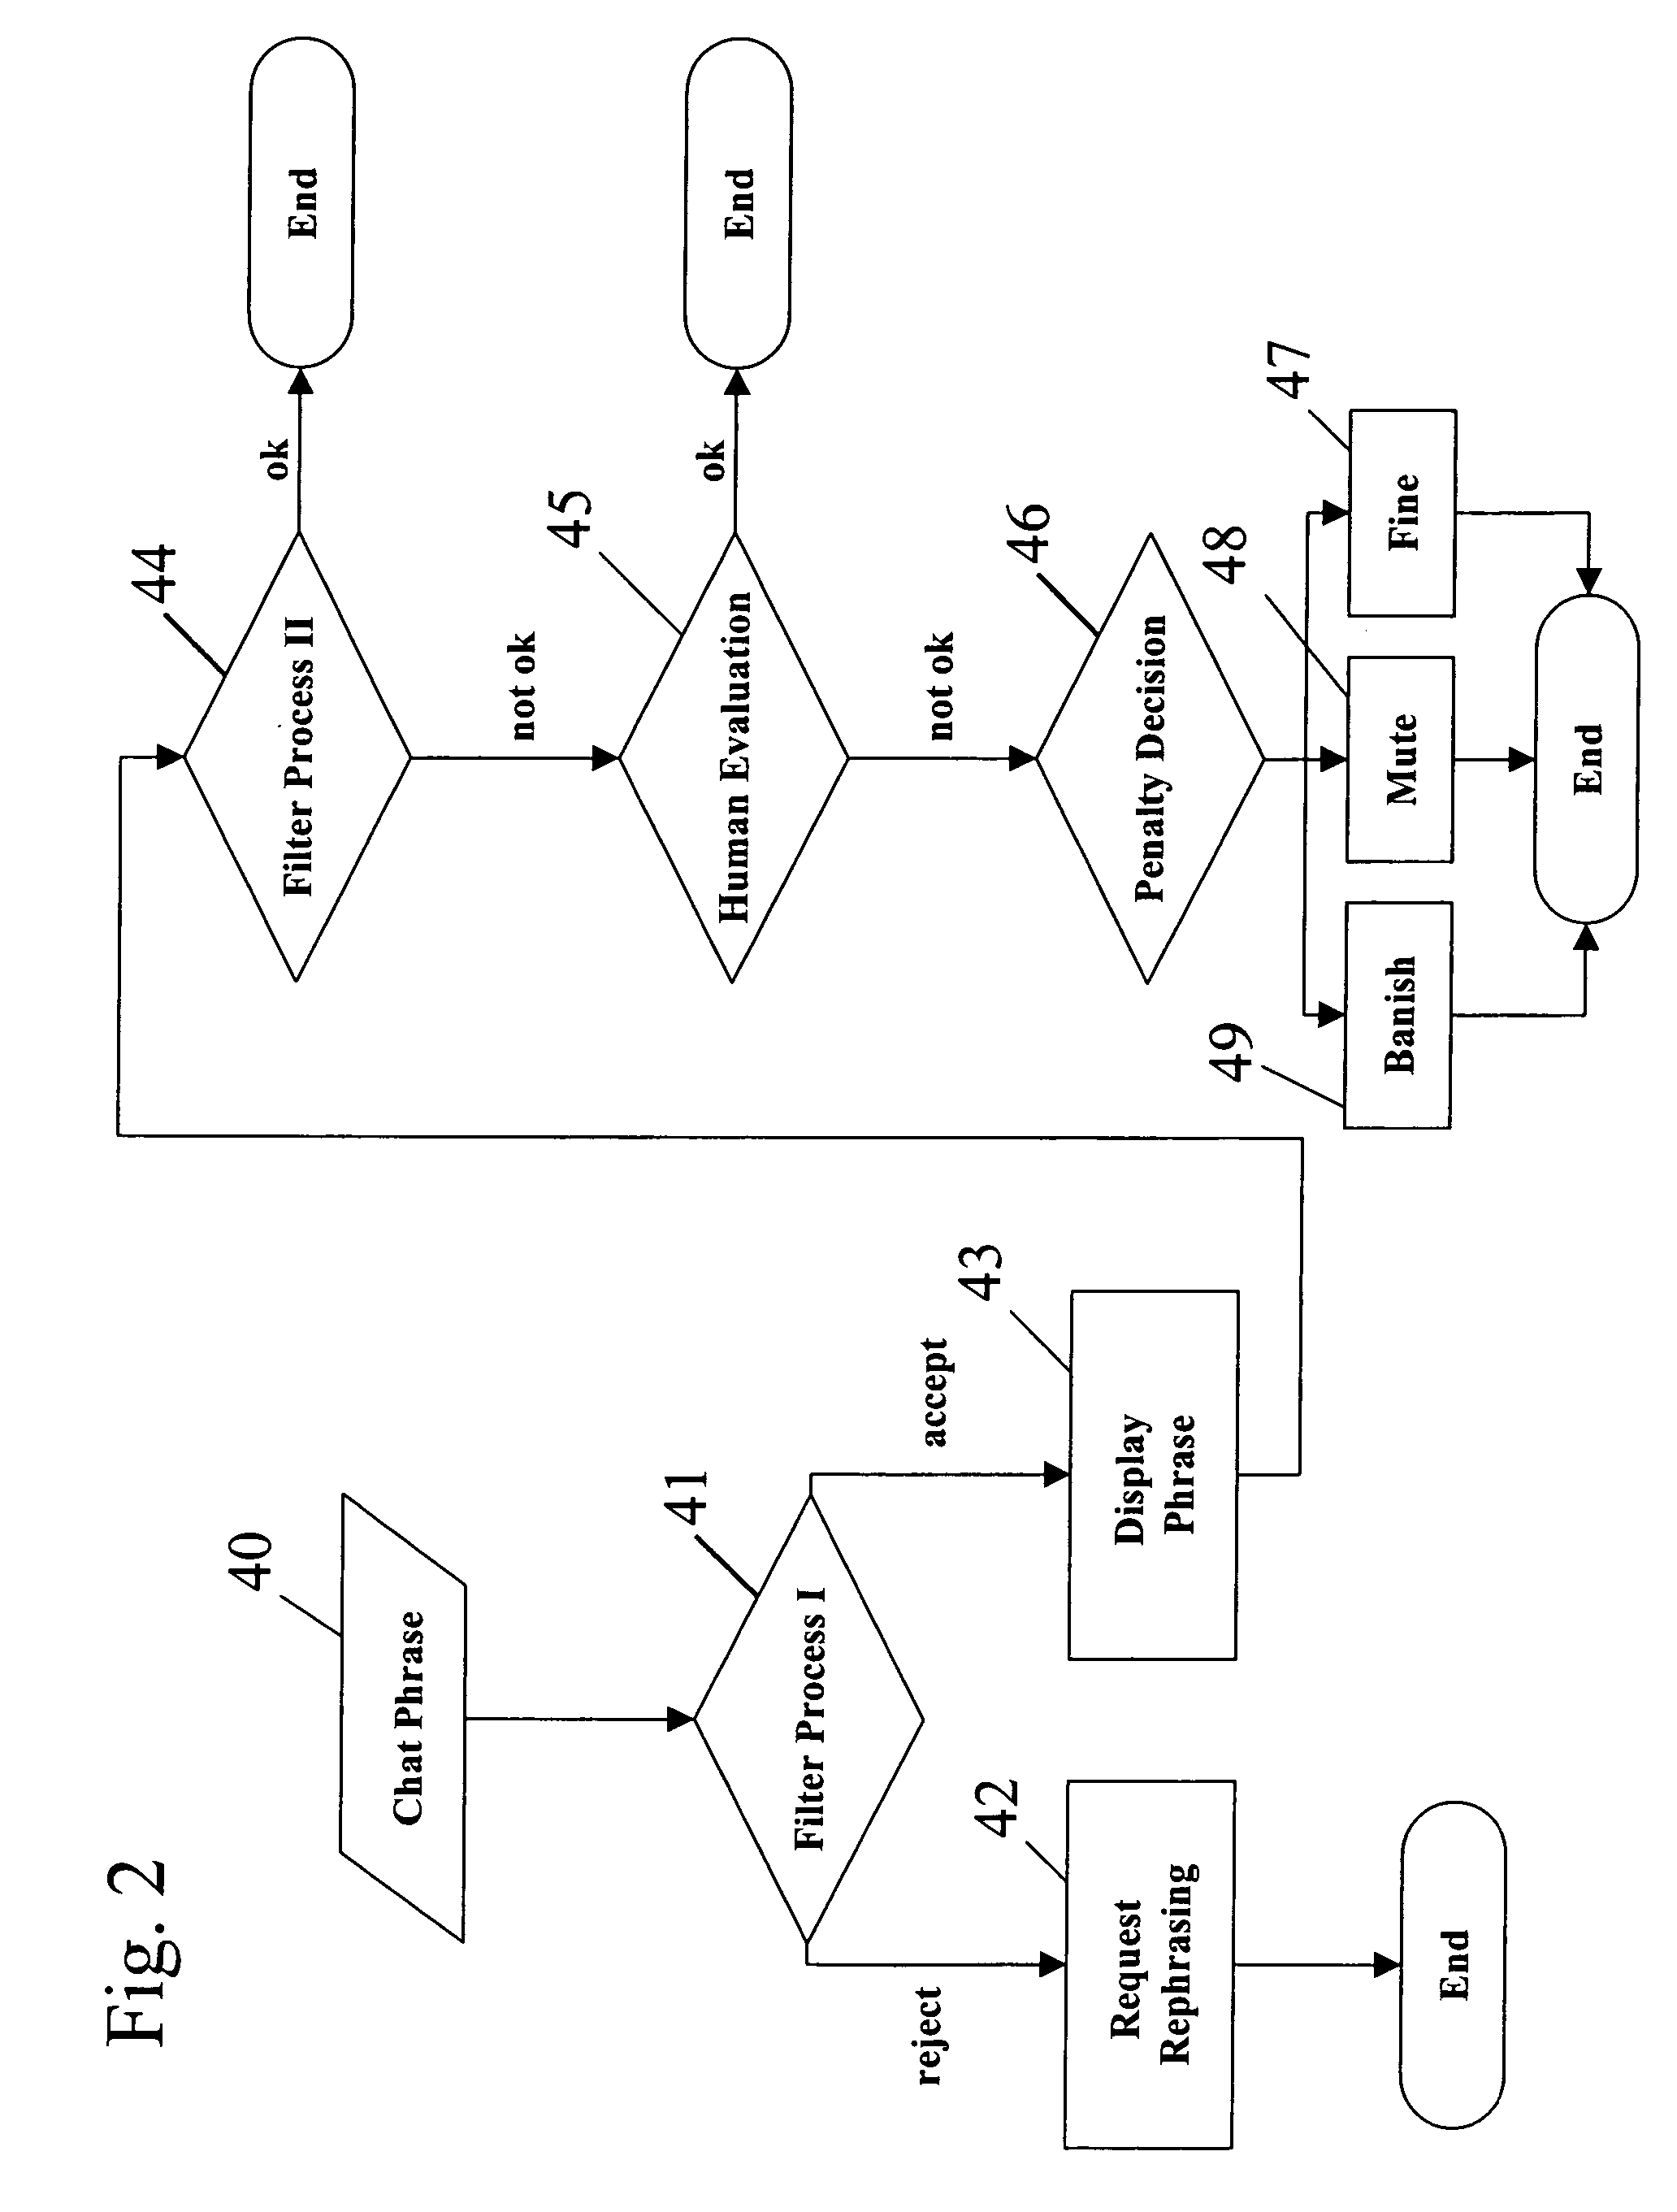 Multi-tiered safety control system and methods for online communities